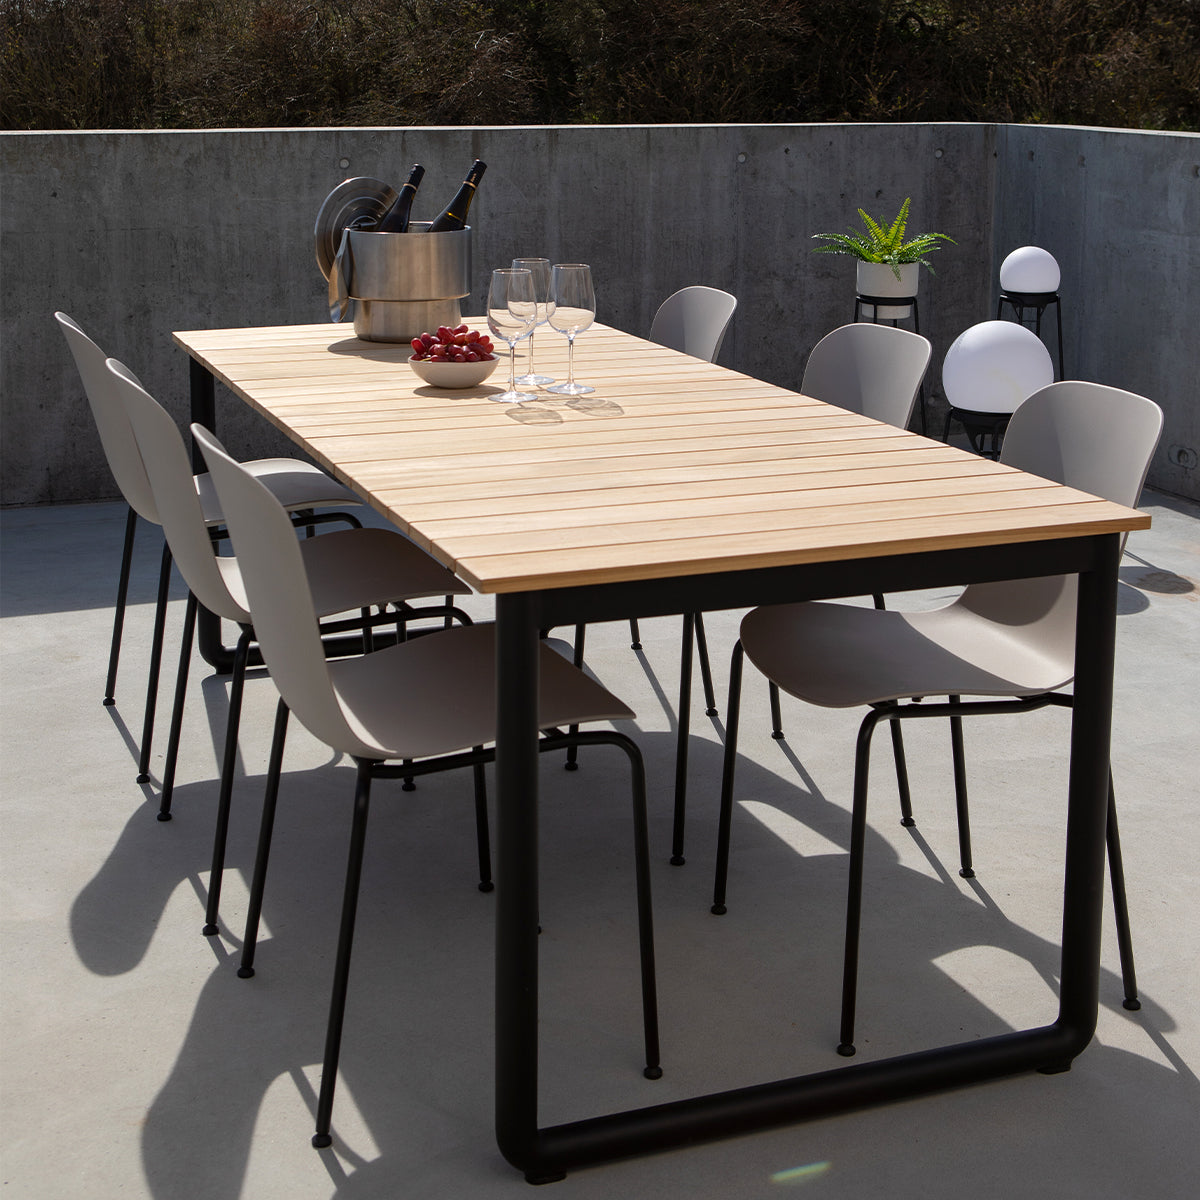 Patio Dining Table - 214x90 [Contract]